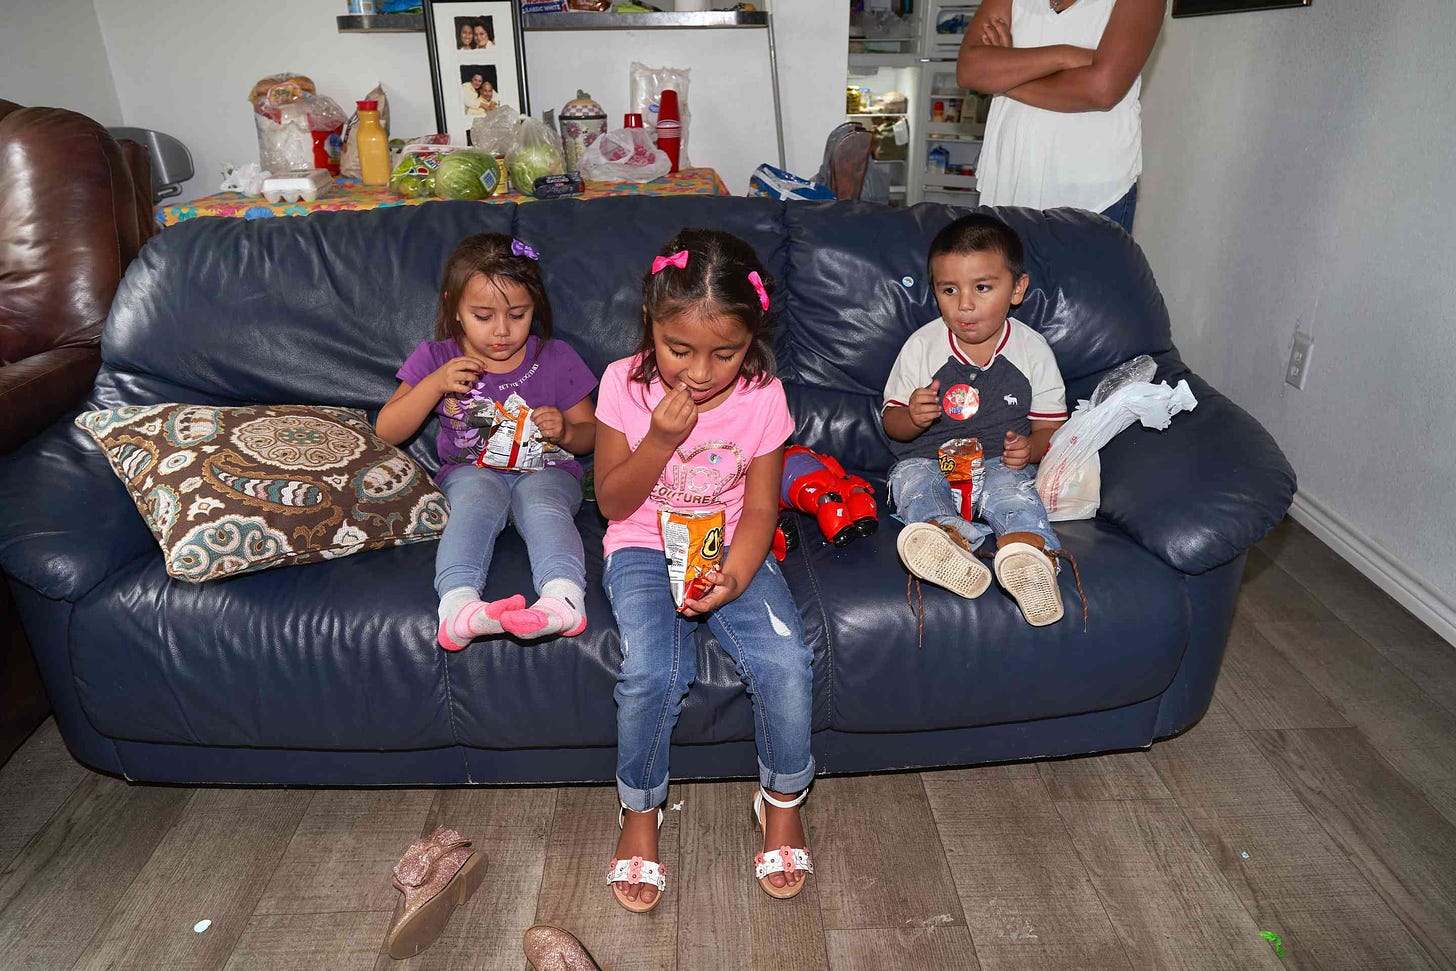 Rivera’s children eat Cheetos on the couch after returning home from picking up groceries. (From left: Destiny, 4, Ana, 6, Jonathan, 3.)